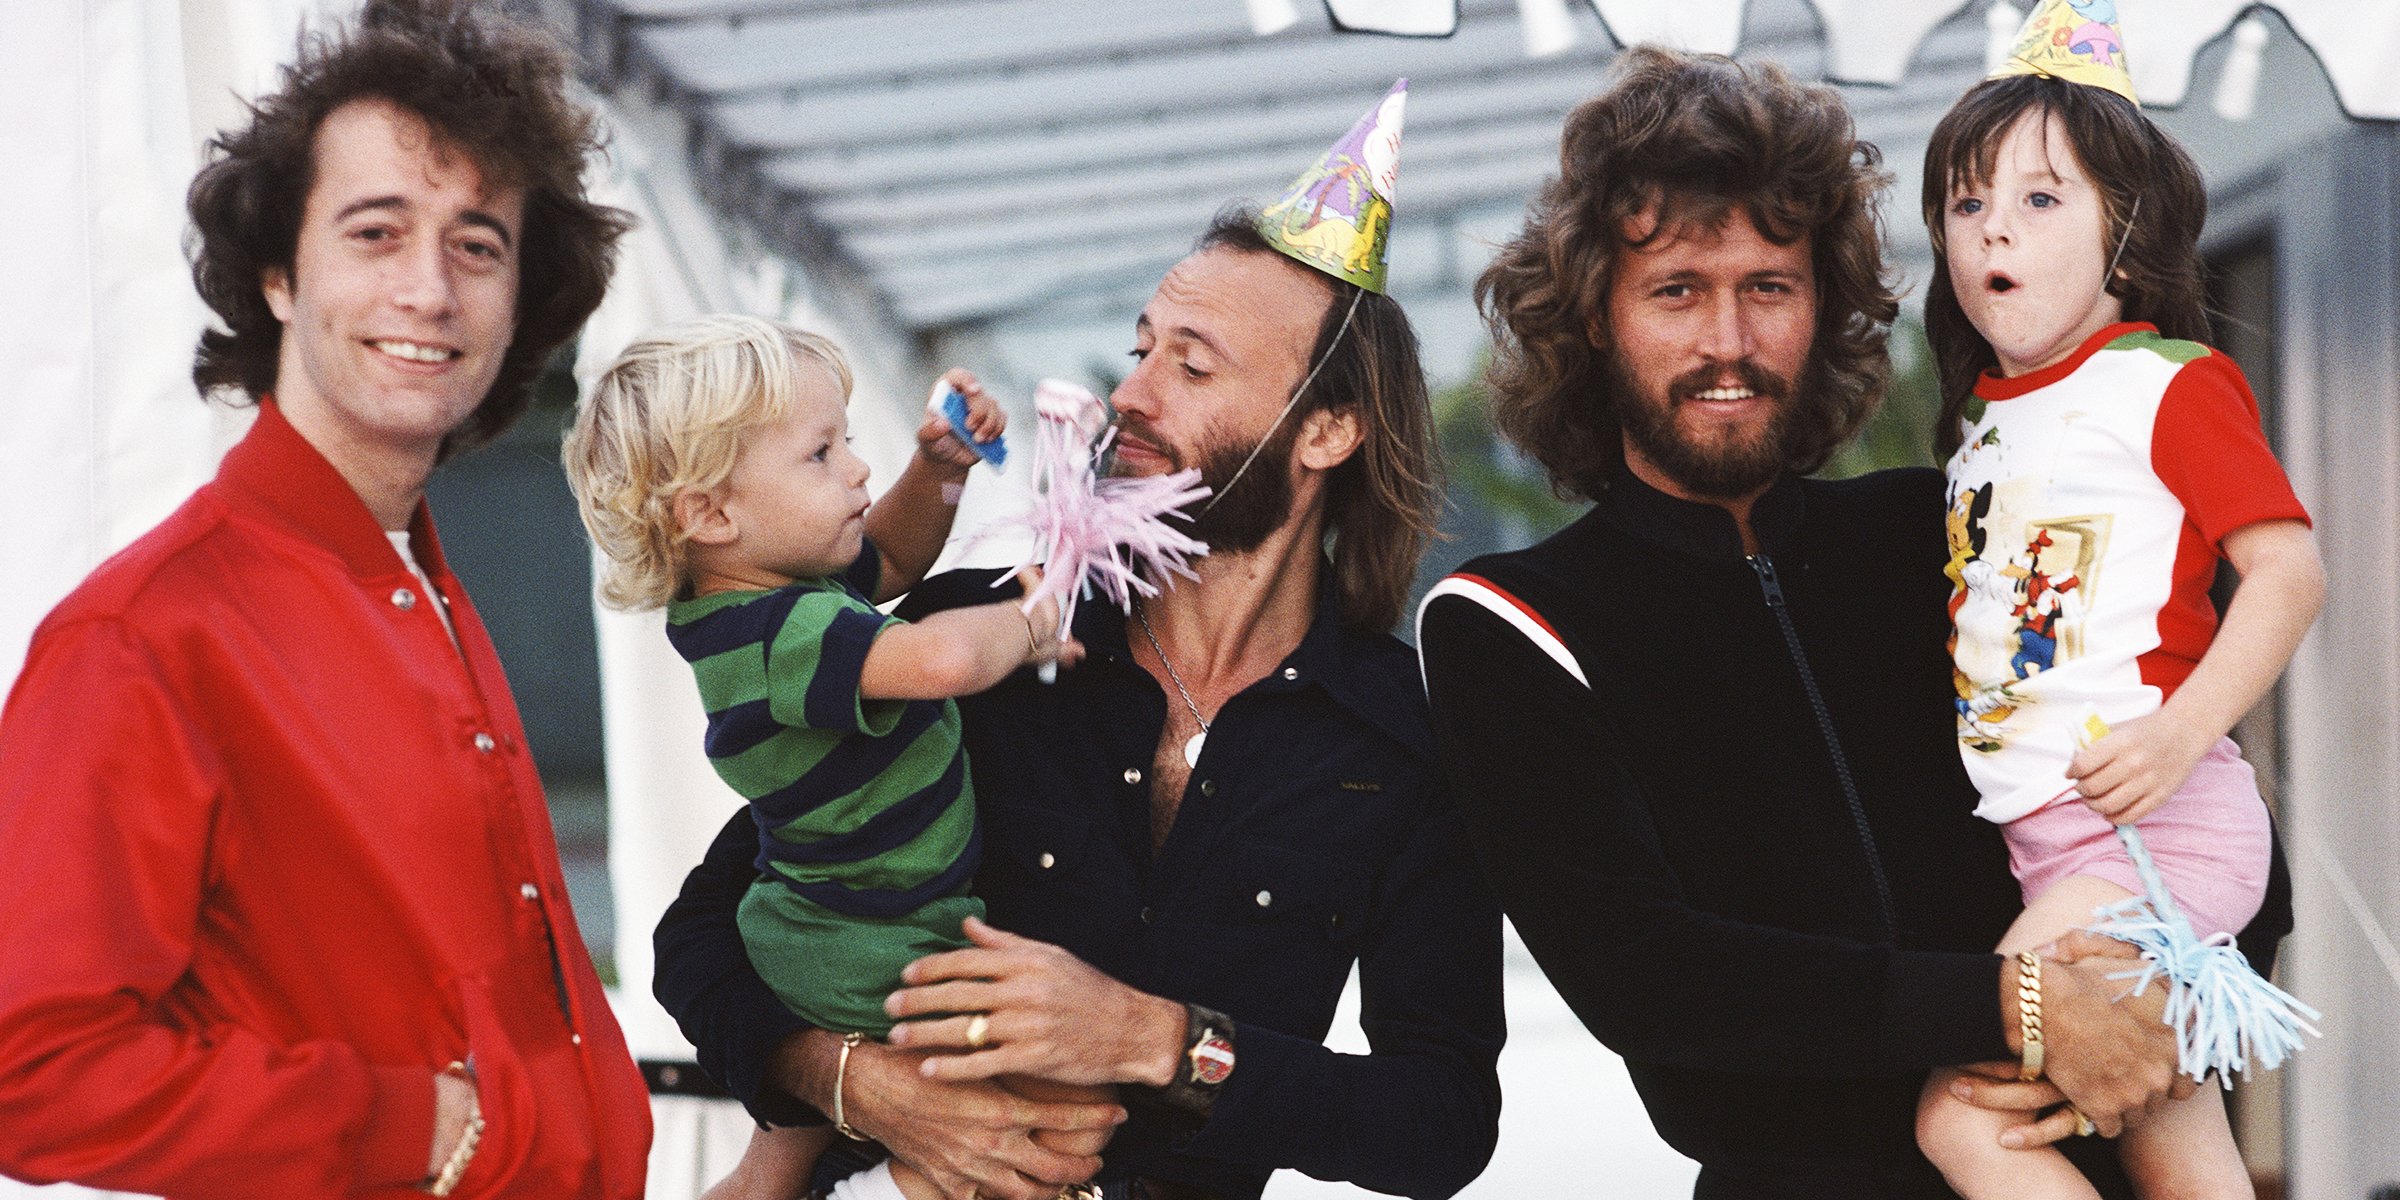 The Bee Gees - Barry Gibb, Maurice Gibb and Robin Gibb with two of their kids | Source: Getty Images